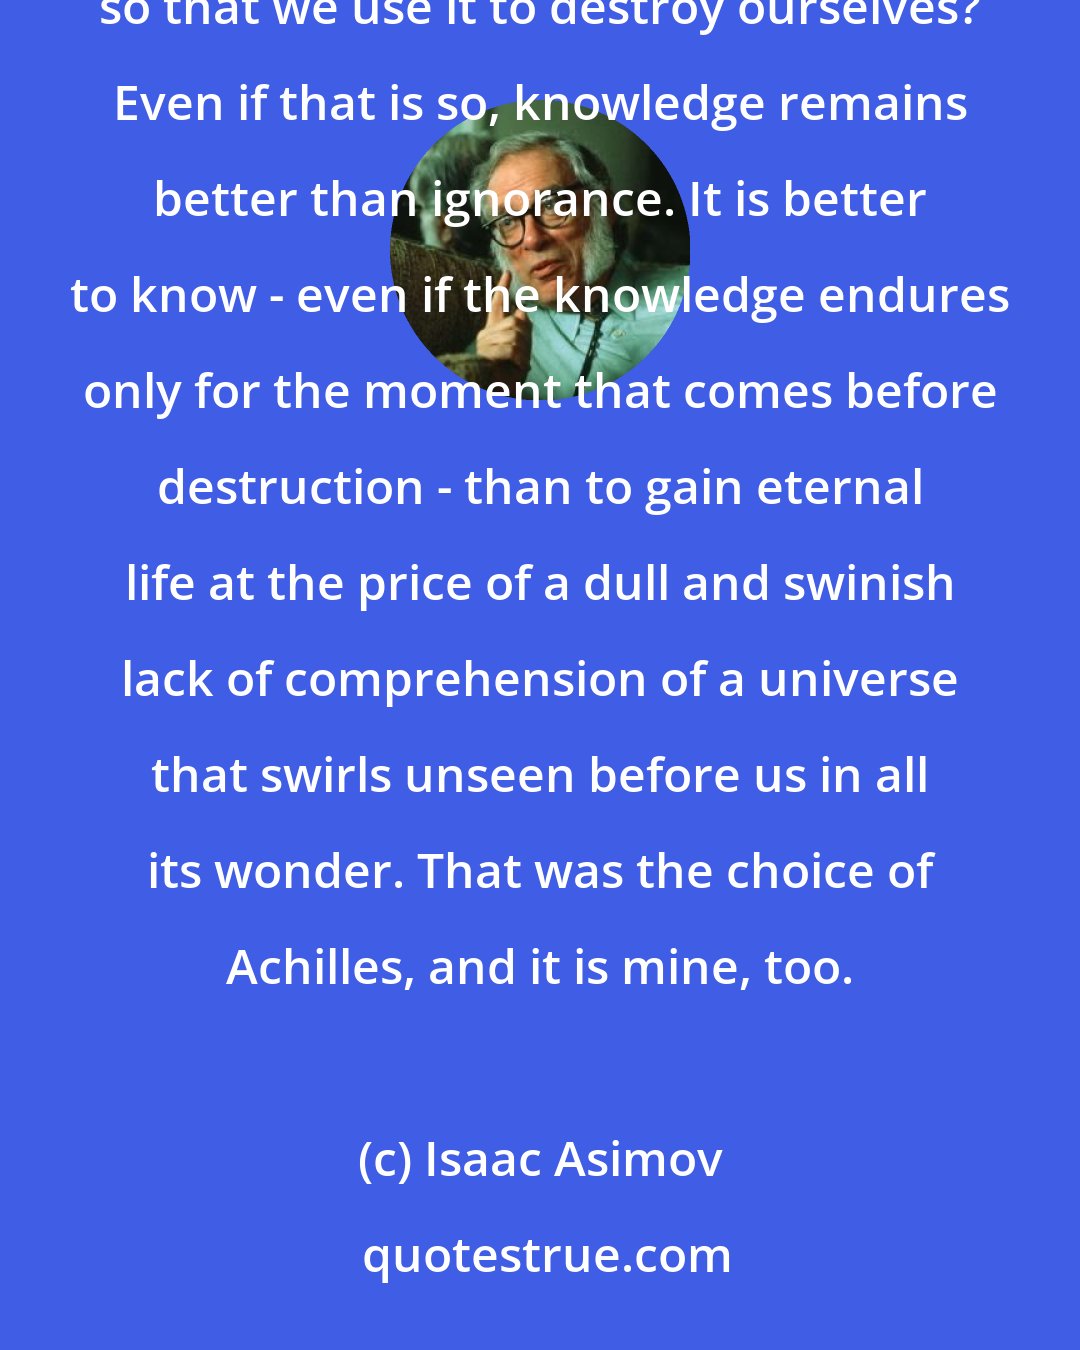 Isaac Asimov: Suppose that we are wise enough to learn and know - and yet not wise enough to control our learning and knowledge, so that we use it to destroy ourselves? Even if that is so, knowledge remains better than ignorance. It is better to know - even if the knowledge endures only for the moment that comes before destruction - than to gain eternal life at the price of a dull and swinish lack of comprehension of a universe that swirls unseen before us in all its wonder. That was the choice of Achilles, and it is mine, too.